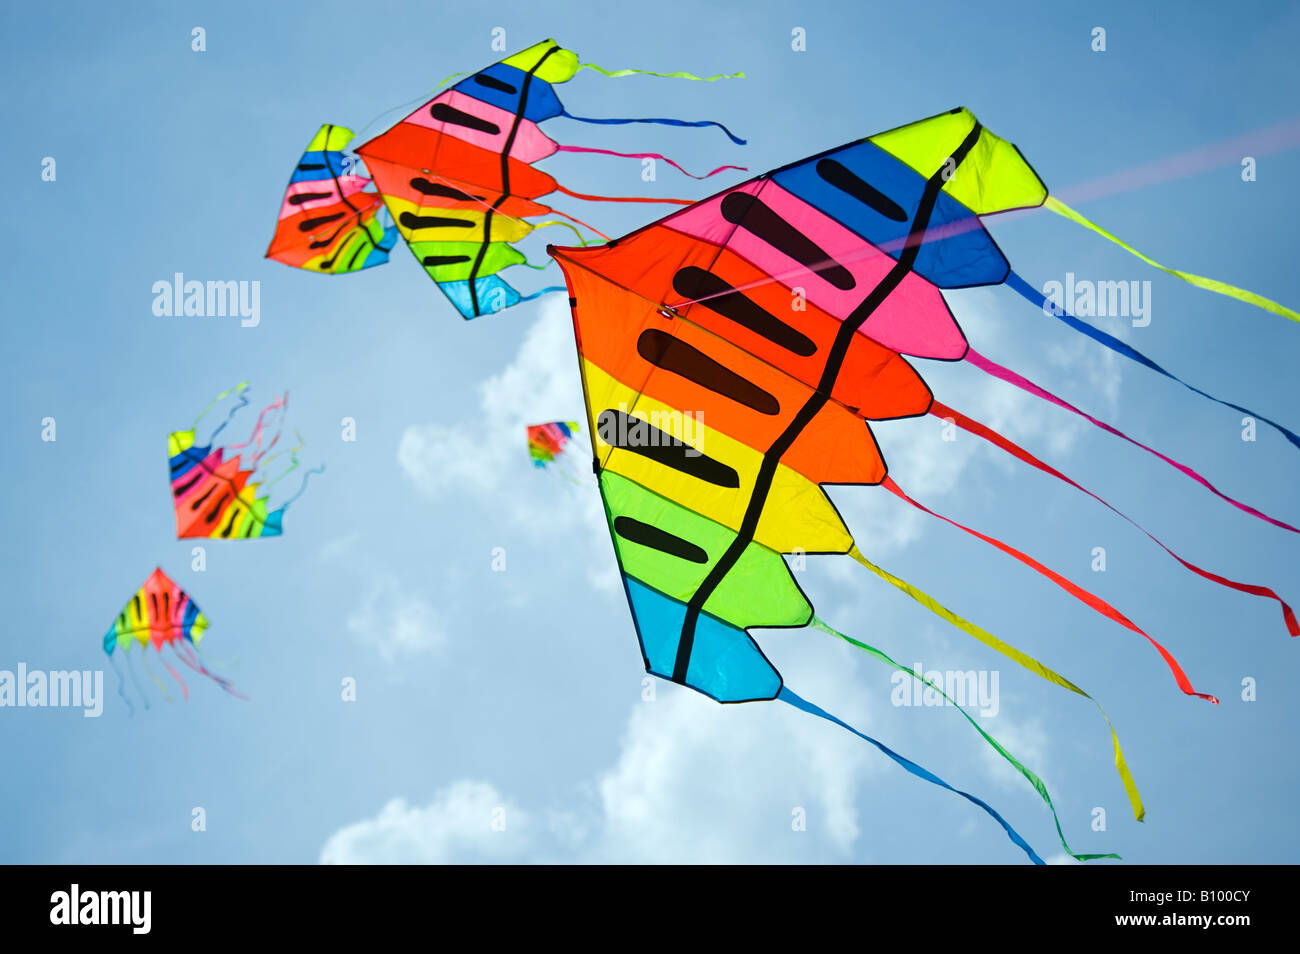 Static line kites flying against a blue and cloudy sky Stock Photo